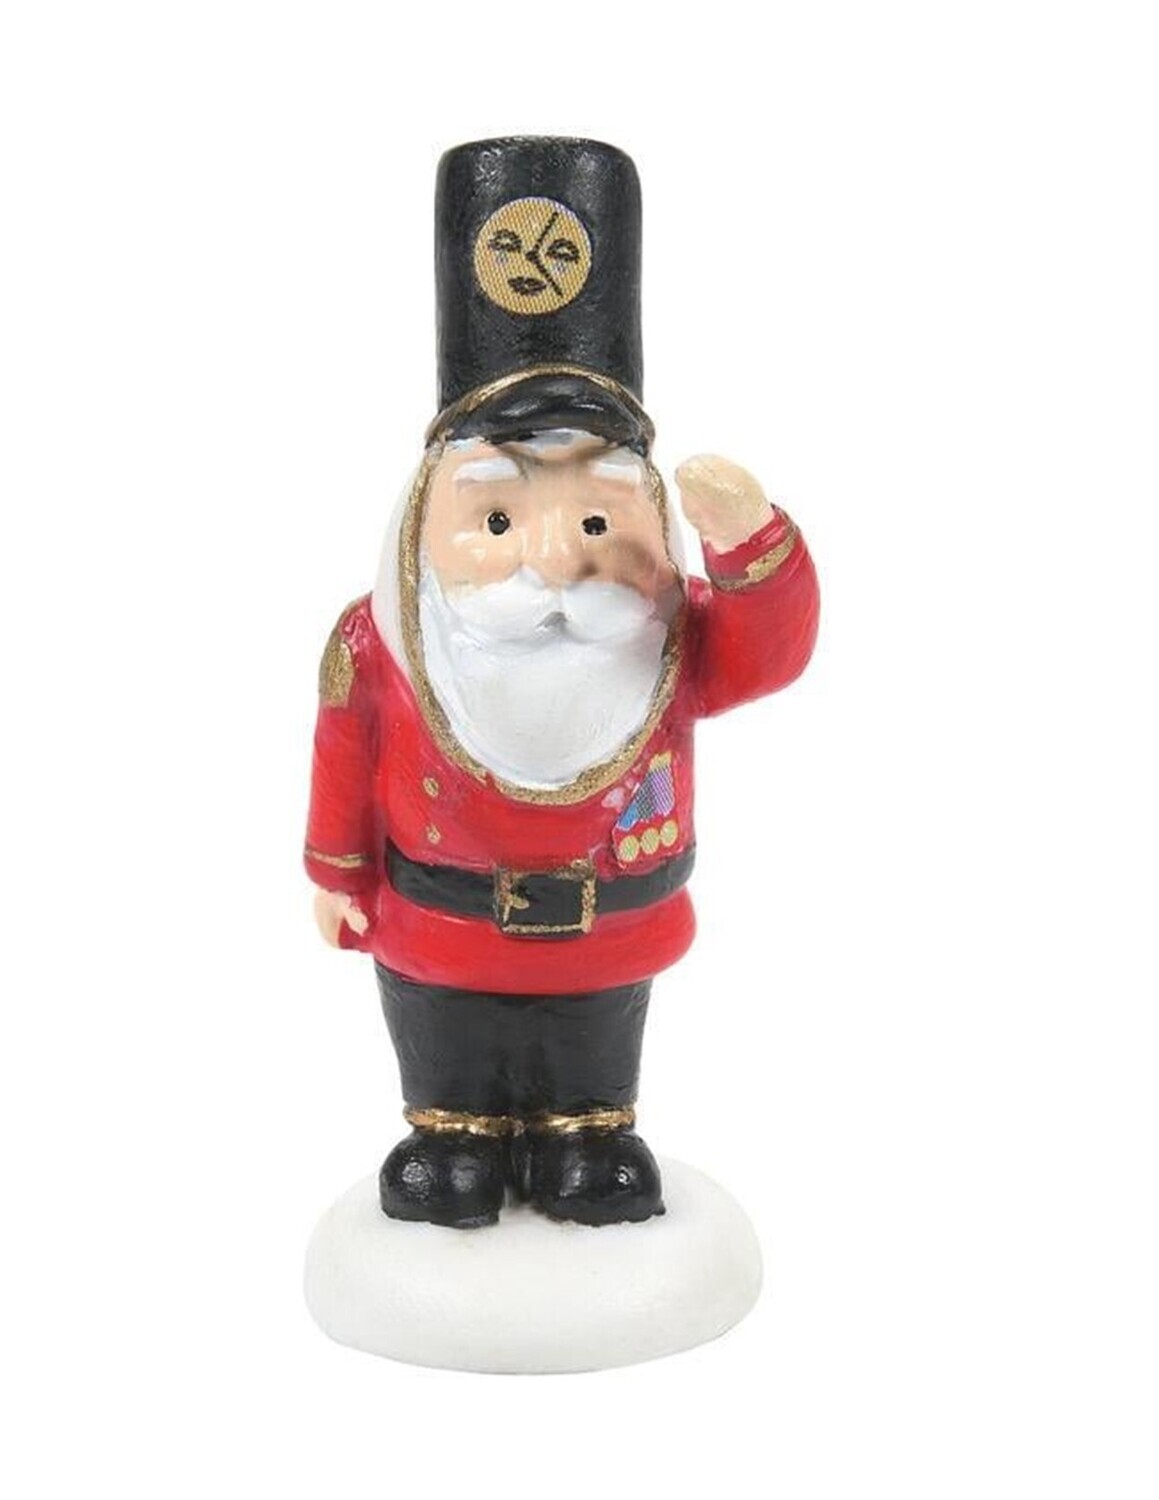 Department 56 North Pole Village "Ready for Duty" FAO Shwarz Elf Toy Soldier Figurine (6009774)